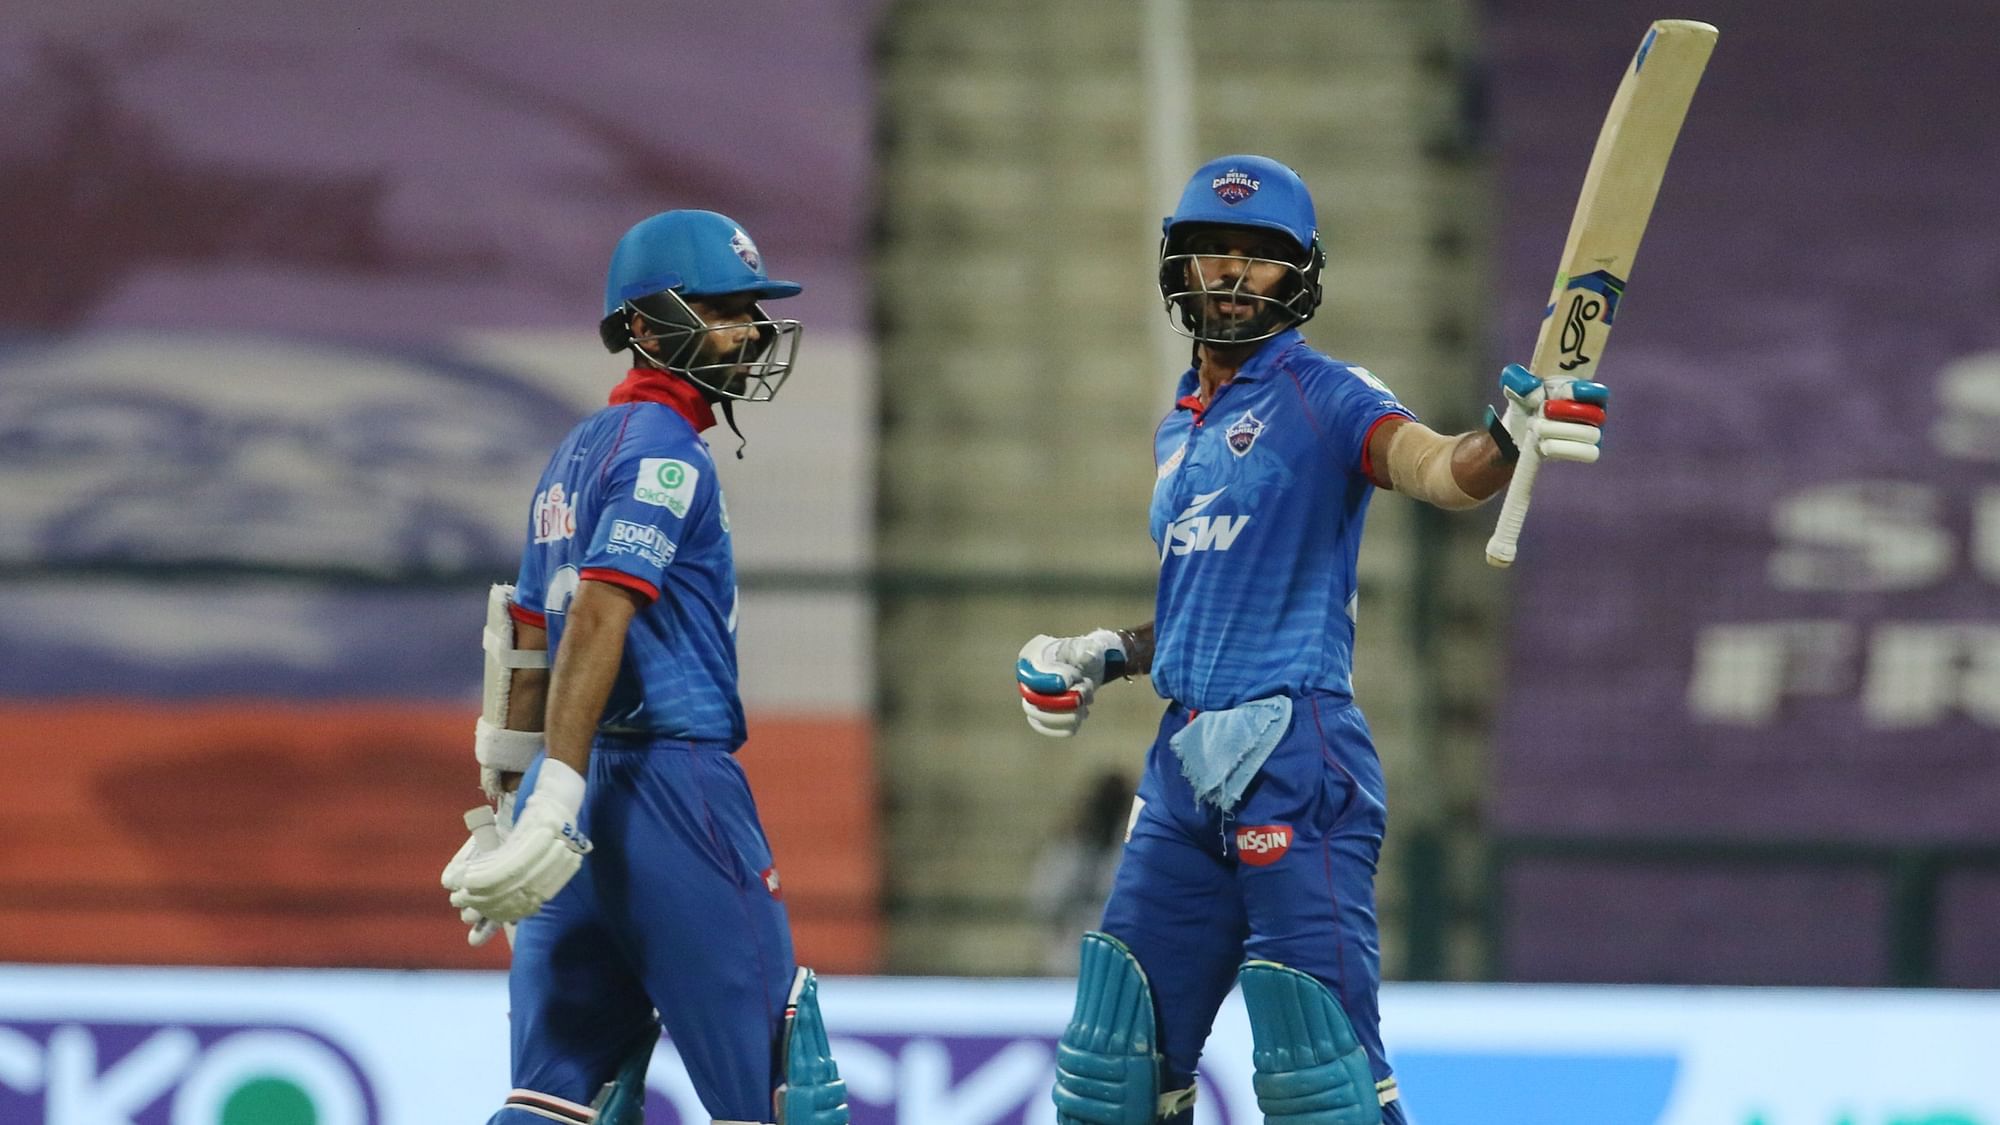 Shikhar Dhawan and Ajinkya Rahane helped DC over the line against RCB by 6 wickets.